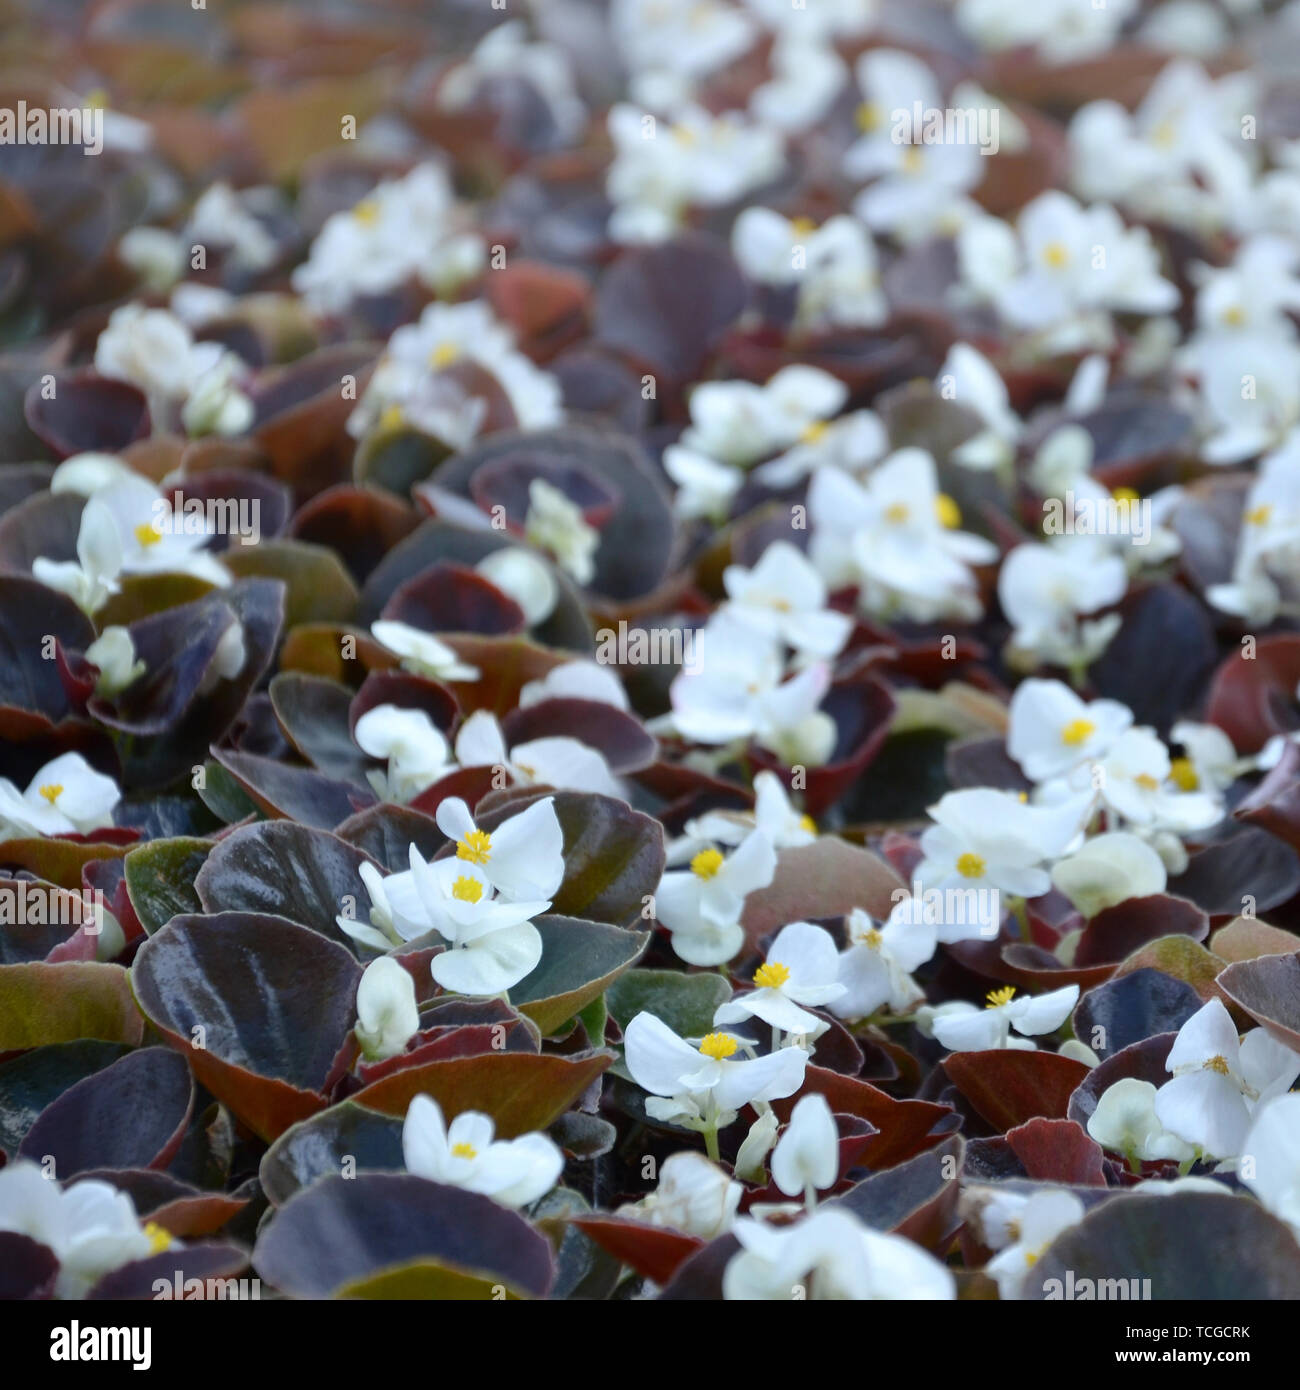 White Begonia cucullata also known as wax begonia and clubed begonia. Field with small white flowers garden close up Stock Photo